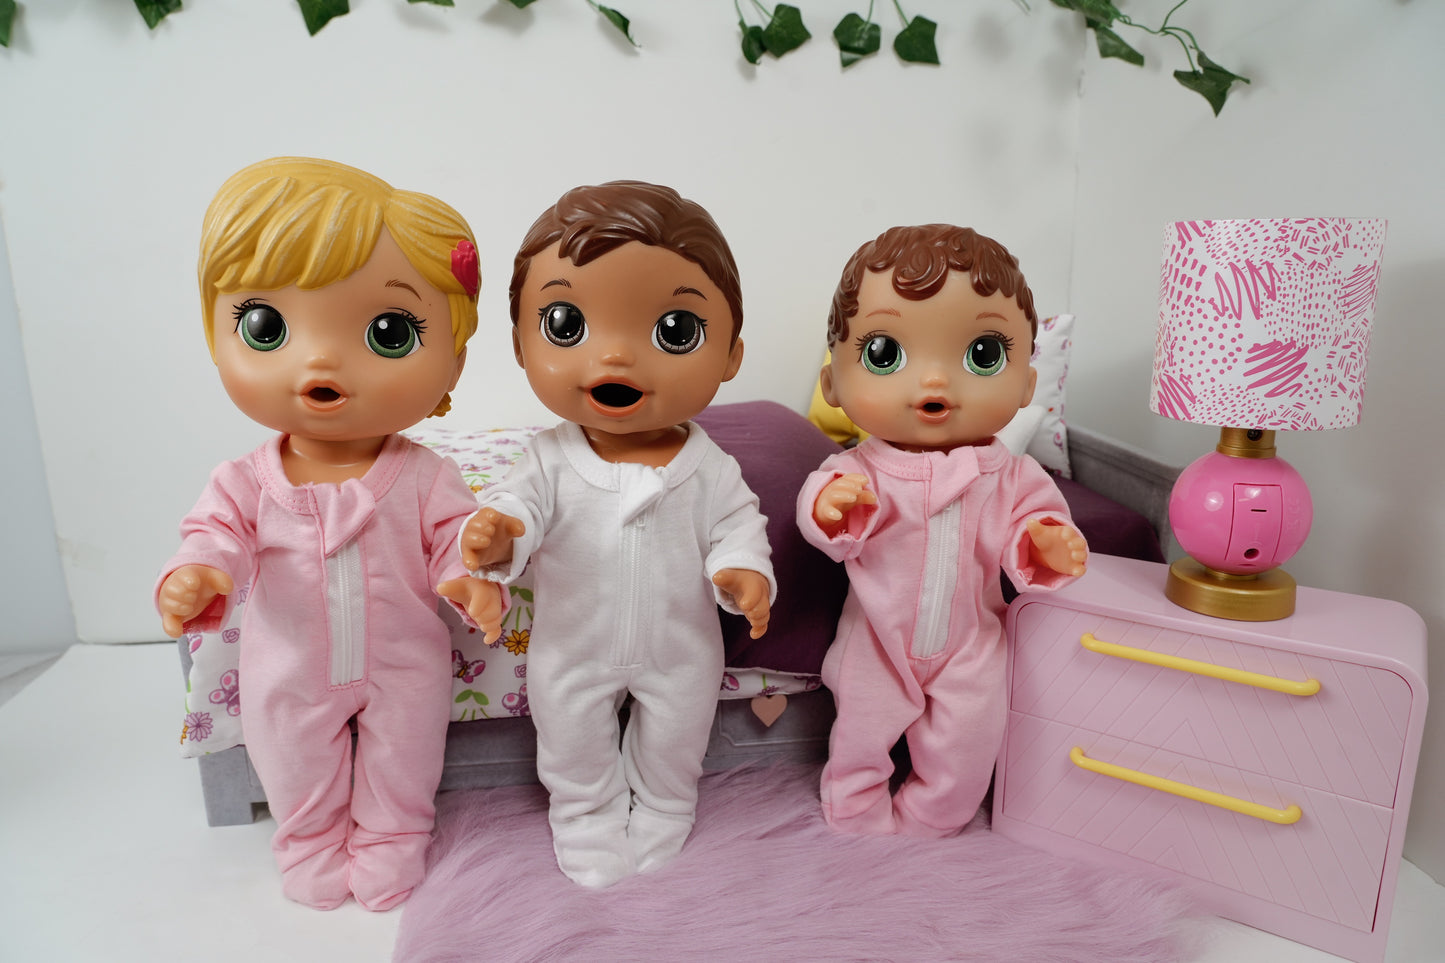 Pajamas for Dolls, clothing 12-14 inch Baby alive doll rumper/ sleeper/ footed pajamas